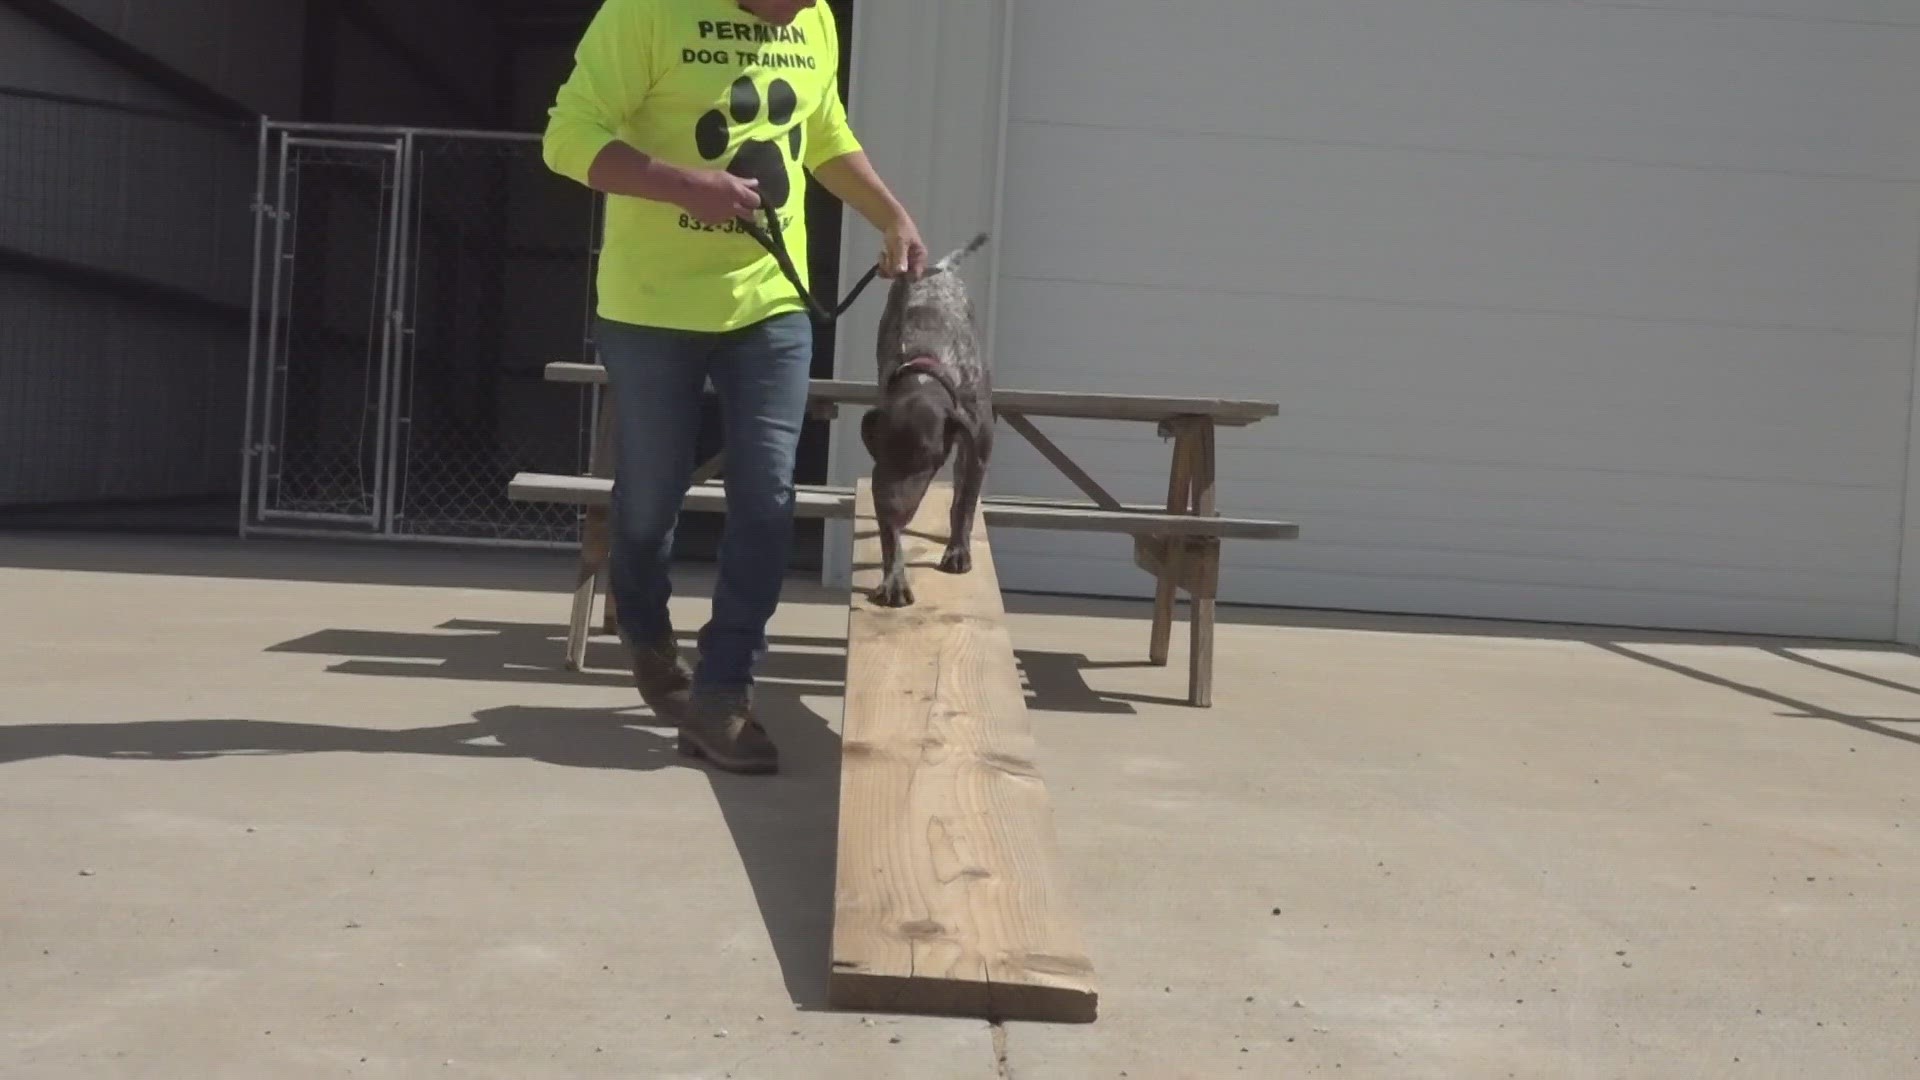 After a family dog attacked a 3-year-old boy, Permian Dog Training Owner Keith Jankowski shares ways you can prevent accidents like this from happening in your home.